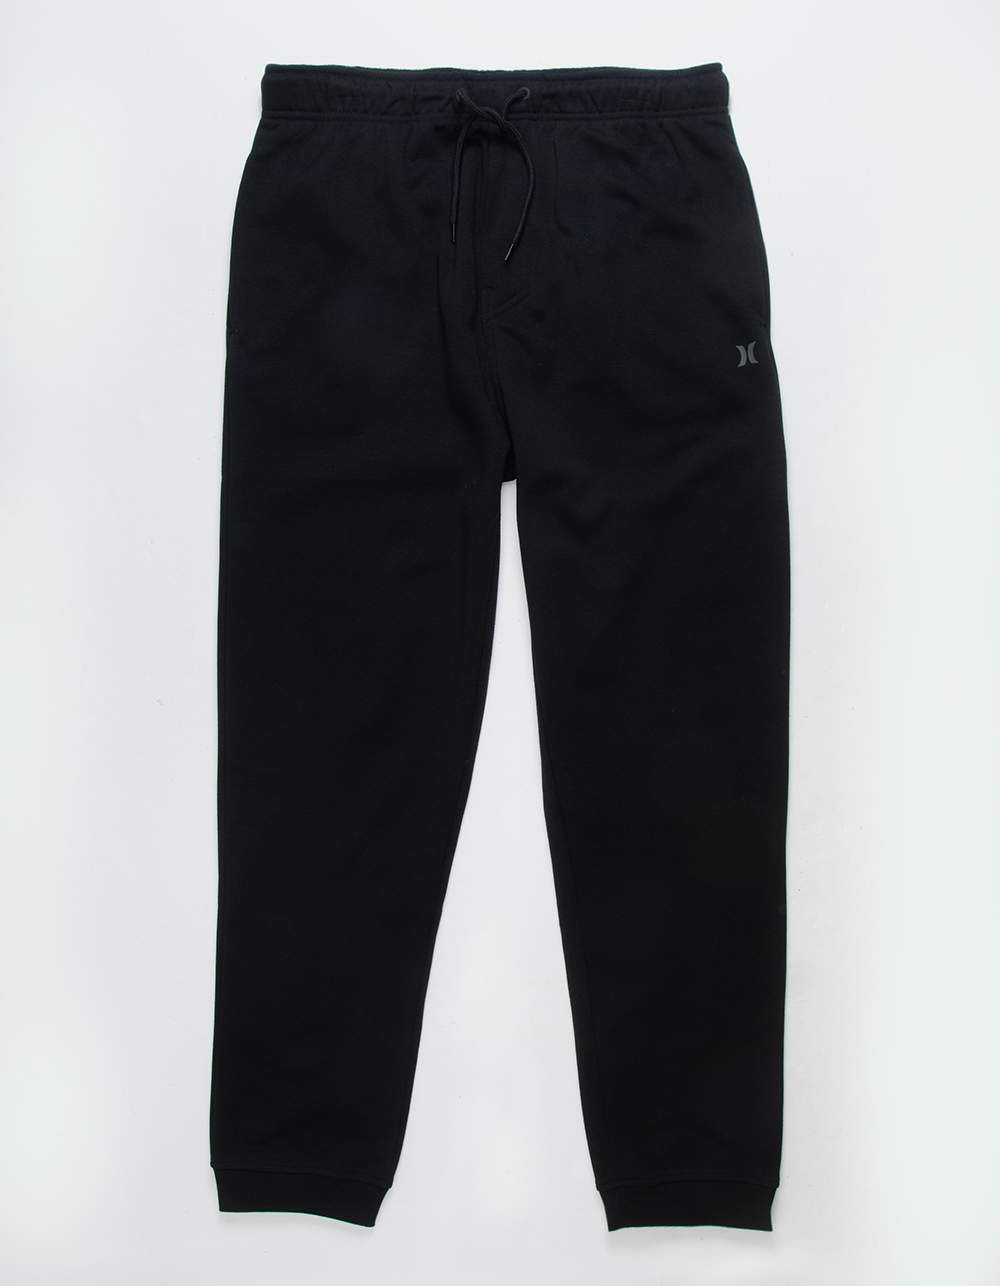 HURLEY One and Only Mens Sweatpants - BLACK | Tillys